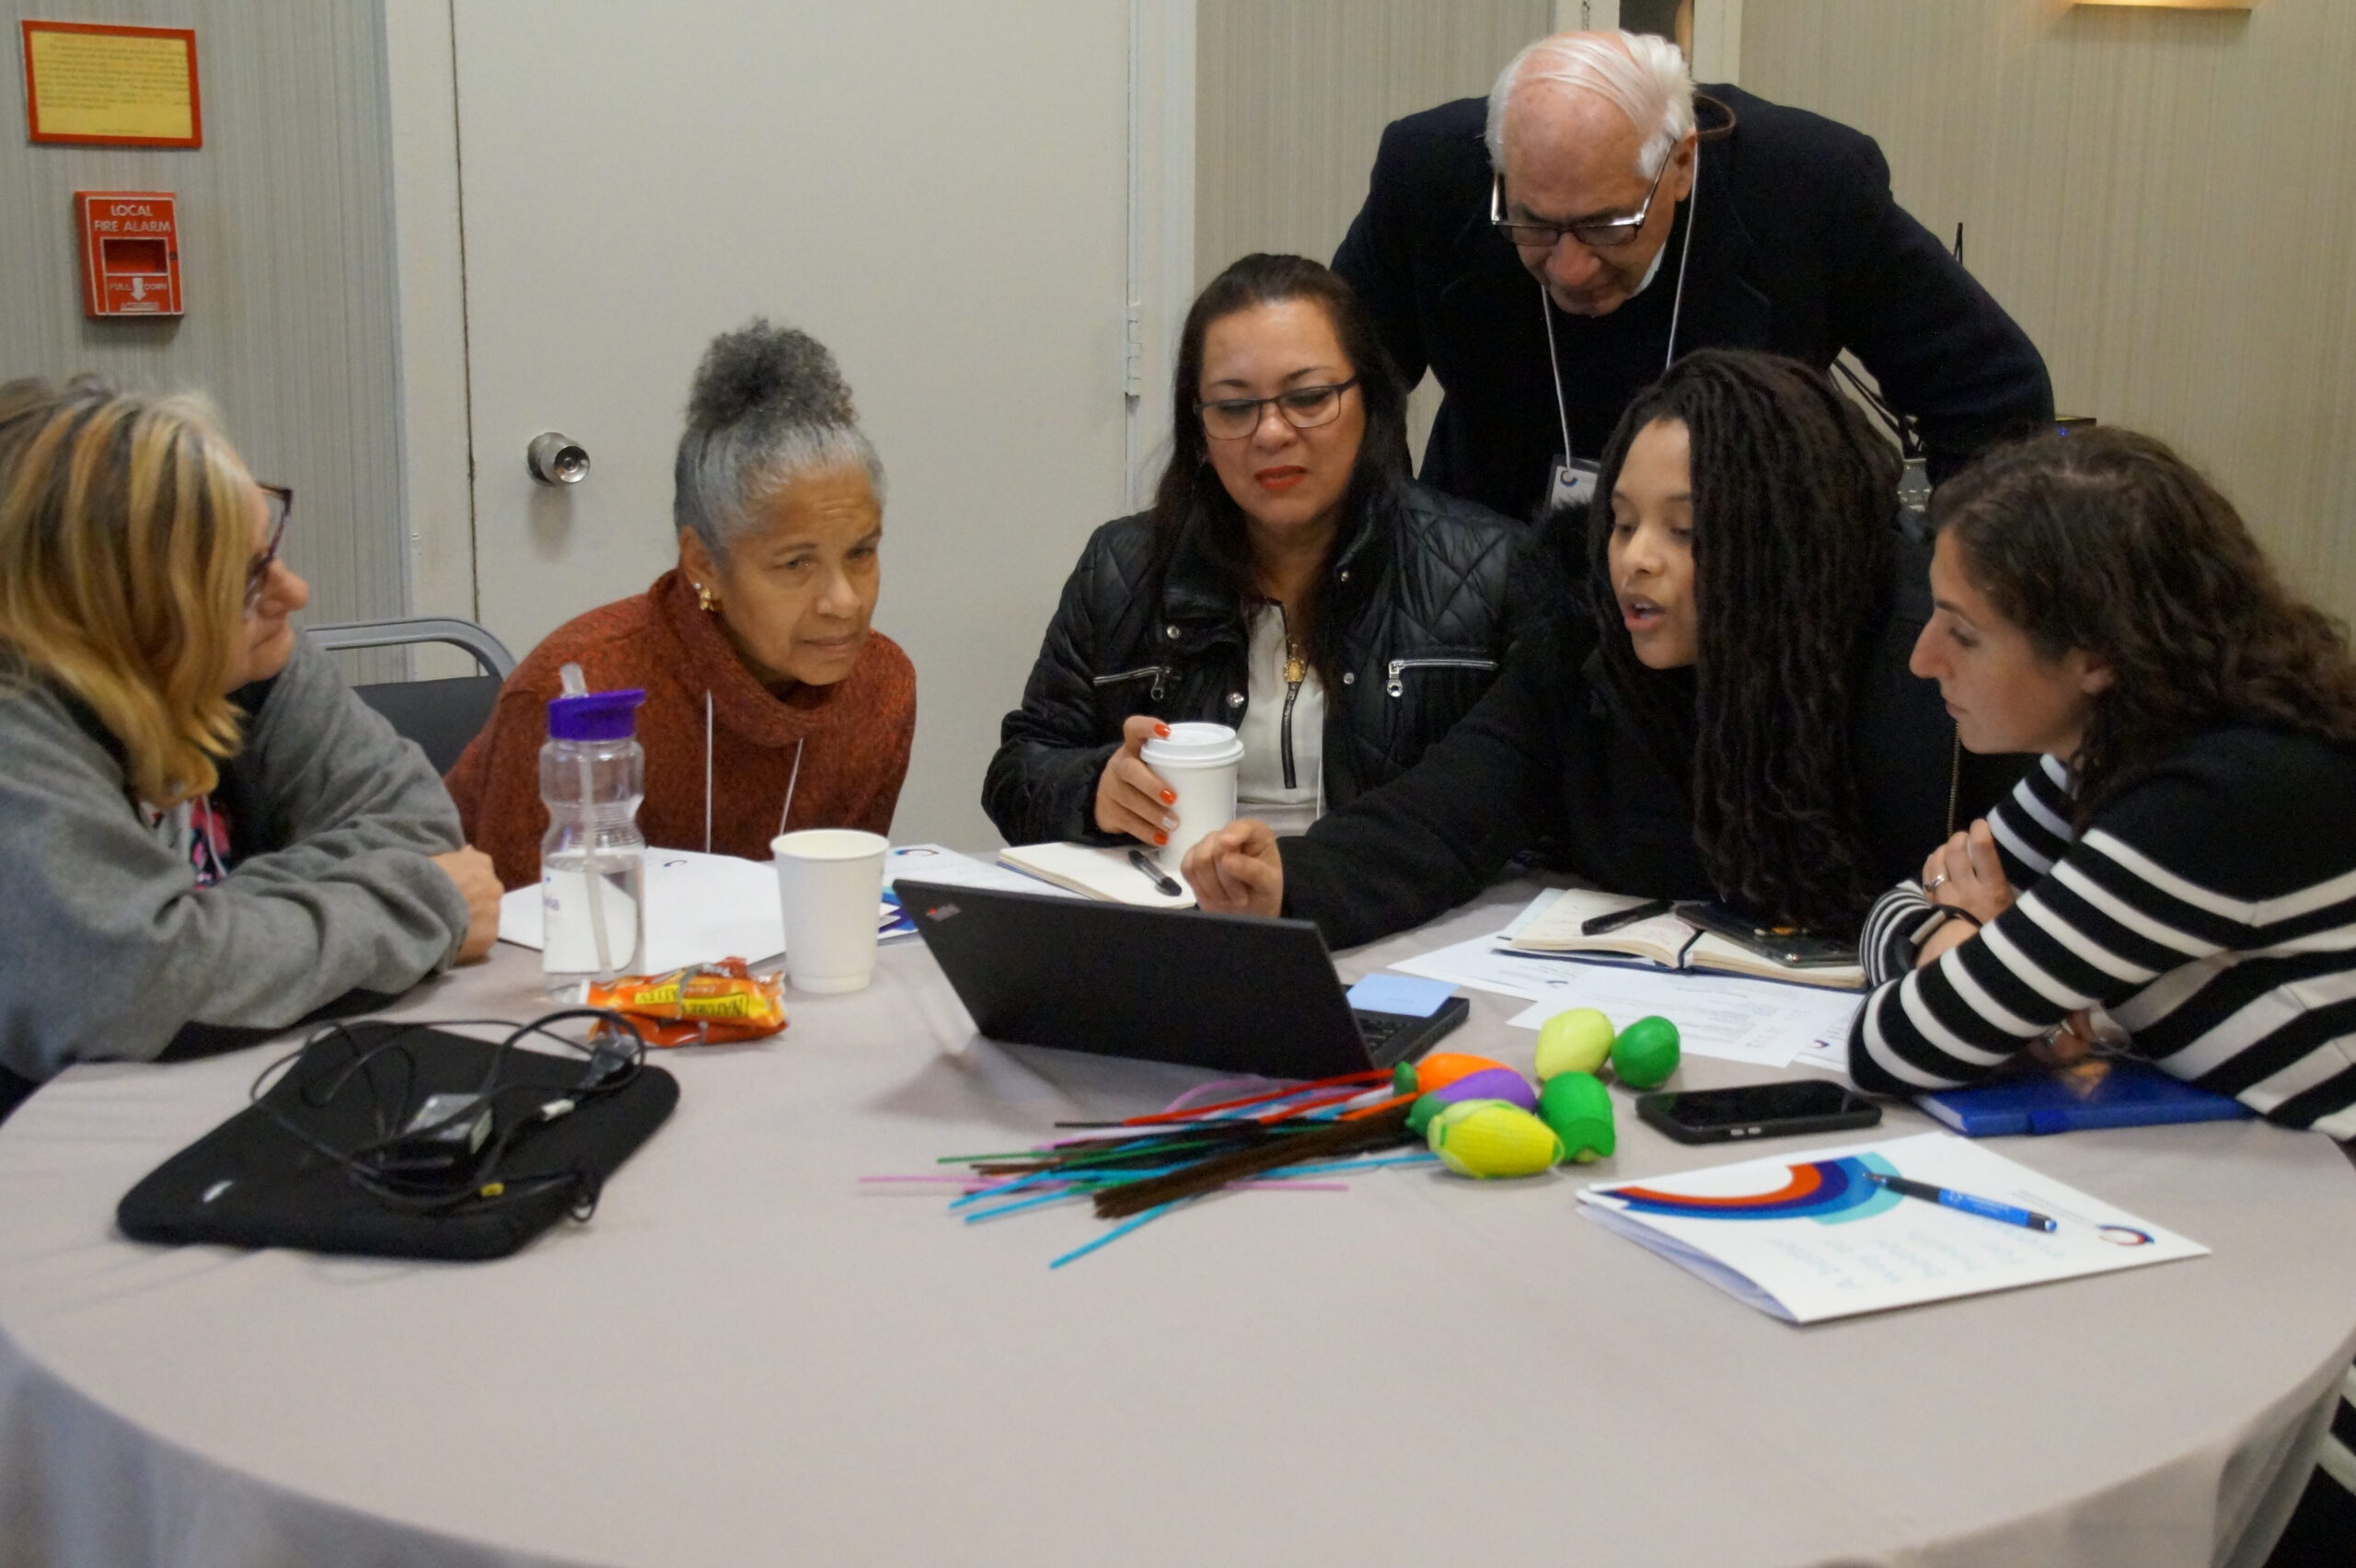 Six health advocates gather around a table to collaborate. They are all looking at a shared laptop screen while one person points to the screen itself, as if sharing thoughts with the group.